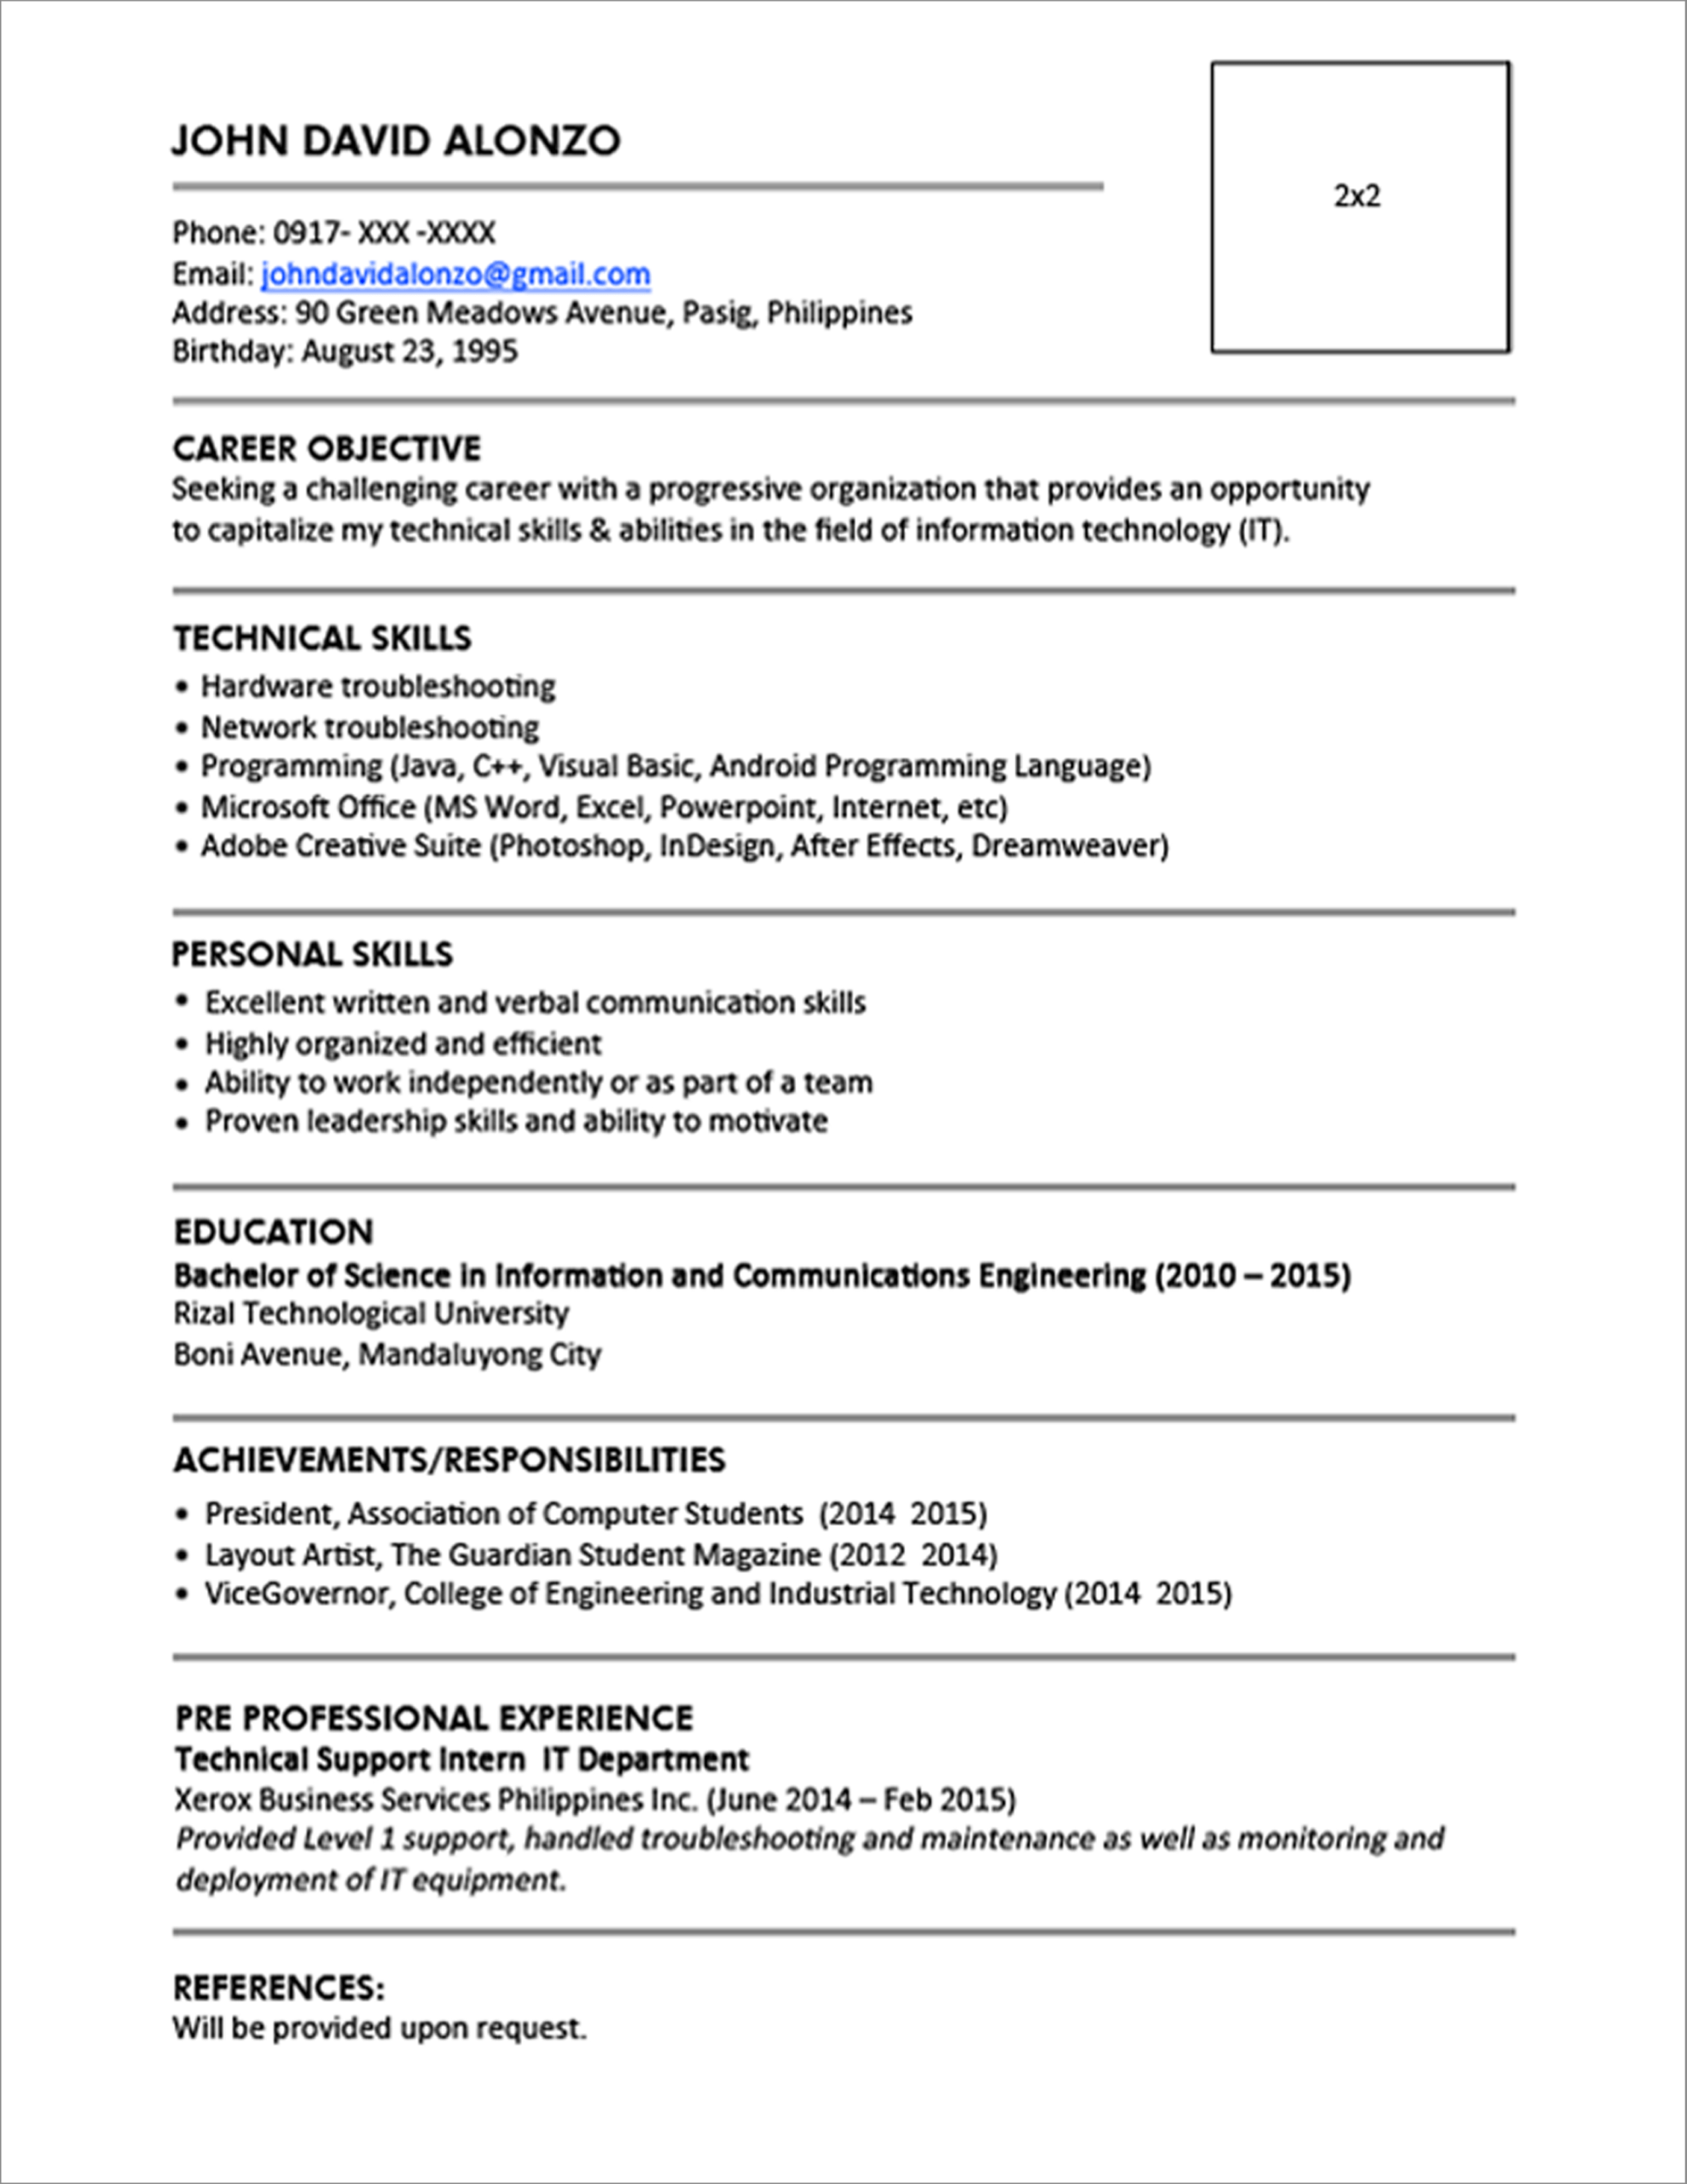 Resume Templates You Can Download | Jobstreet Philippines For College Student Resume Template Microsoft Word